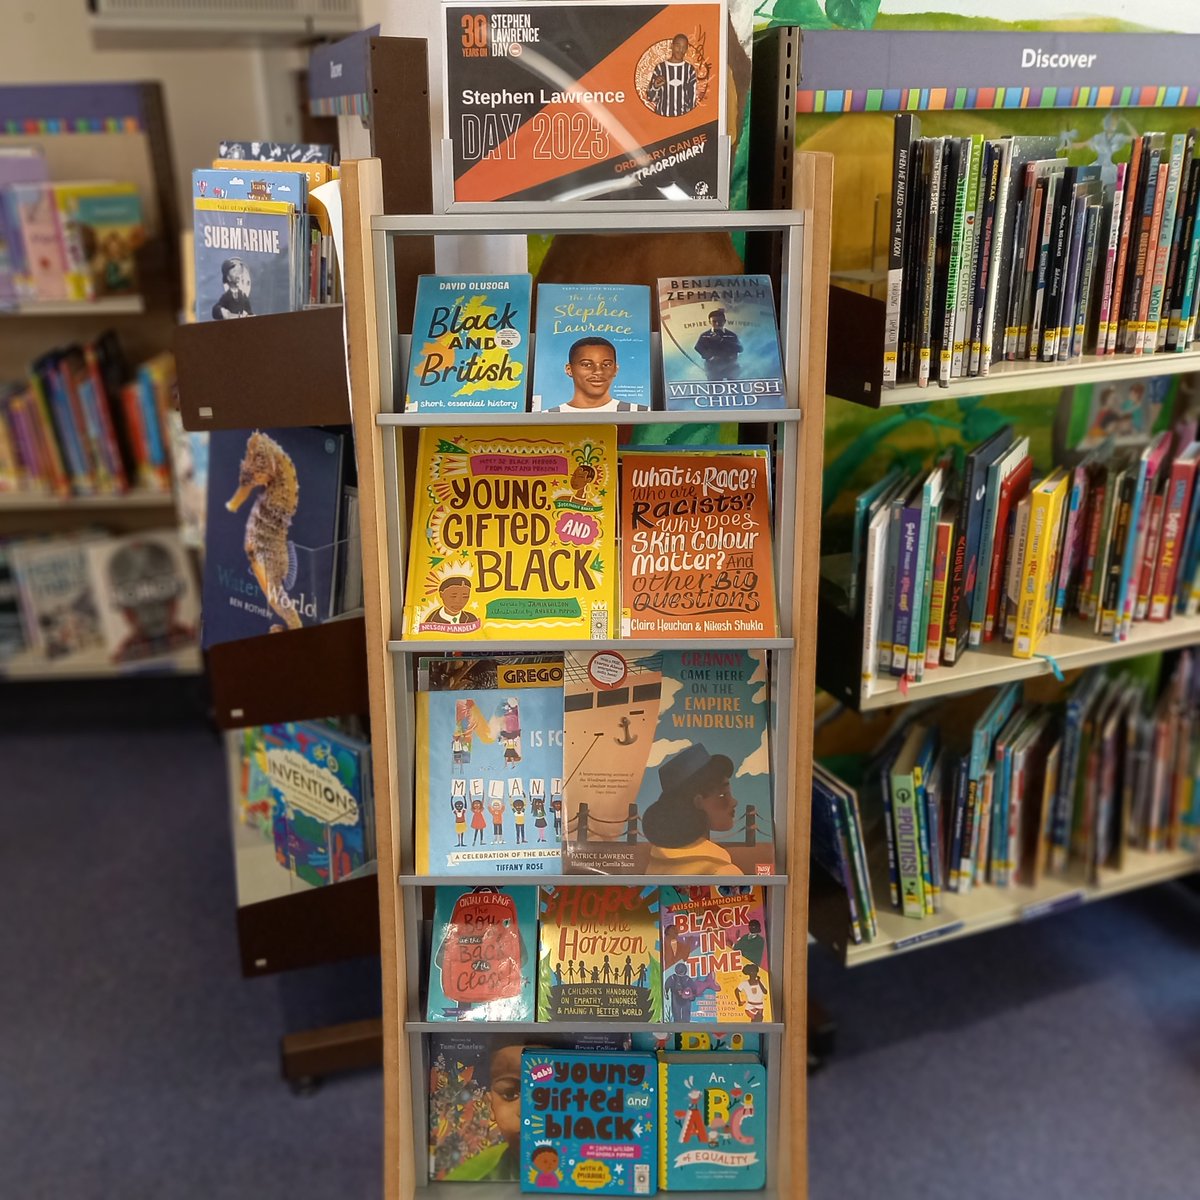 '...meaningful change starts with tangible actions.'
Today is #StephenLawrenceDay and we have put together a display to help children learn about Stephen Lawrence's legacy thirty years on. Find out more here: stephenlawrenceday.org
#SLDay23 @sldayfdn @SurreyLibraries